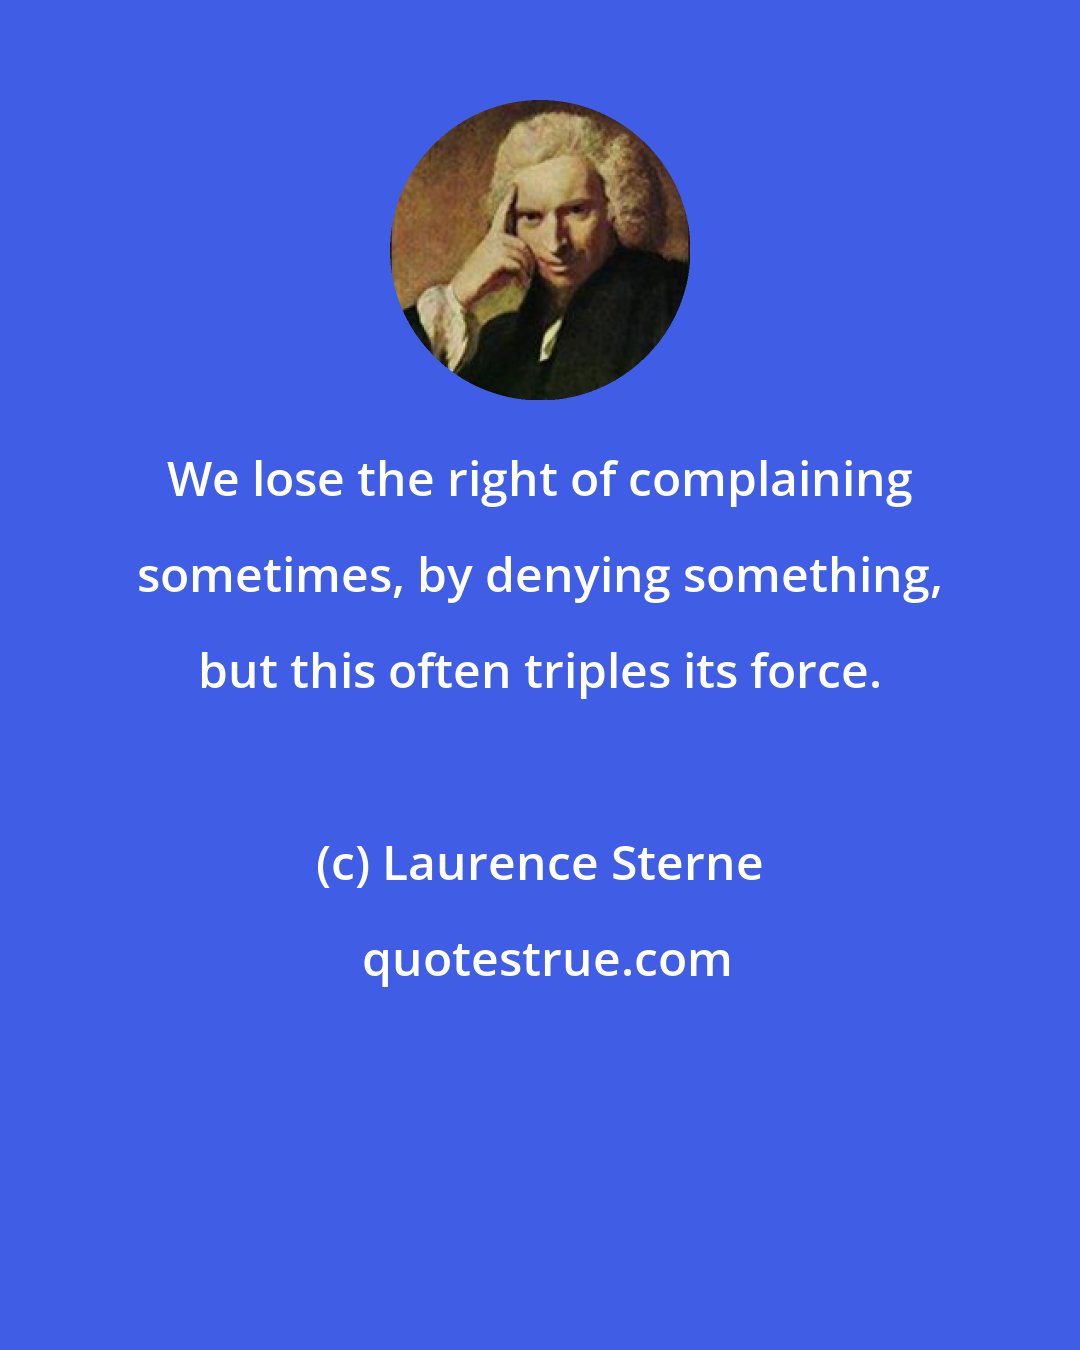 Laurence Sterne: We lose the right of complaining sometimes, by denying something, but this often triples its force.